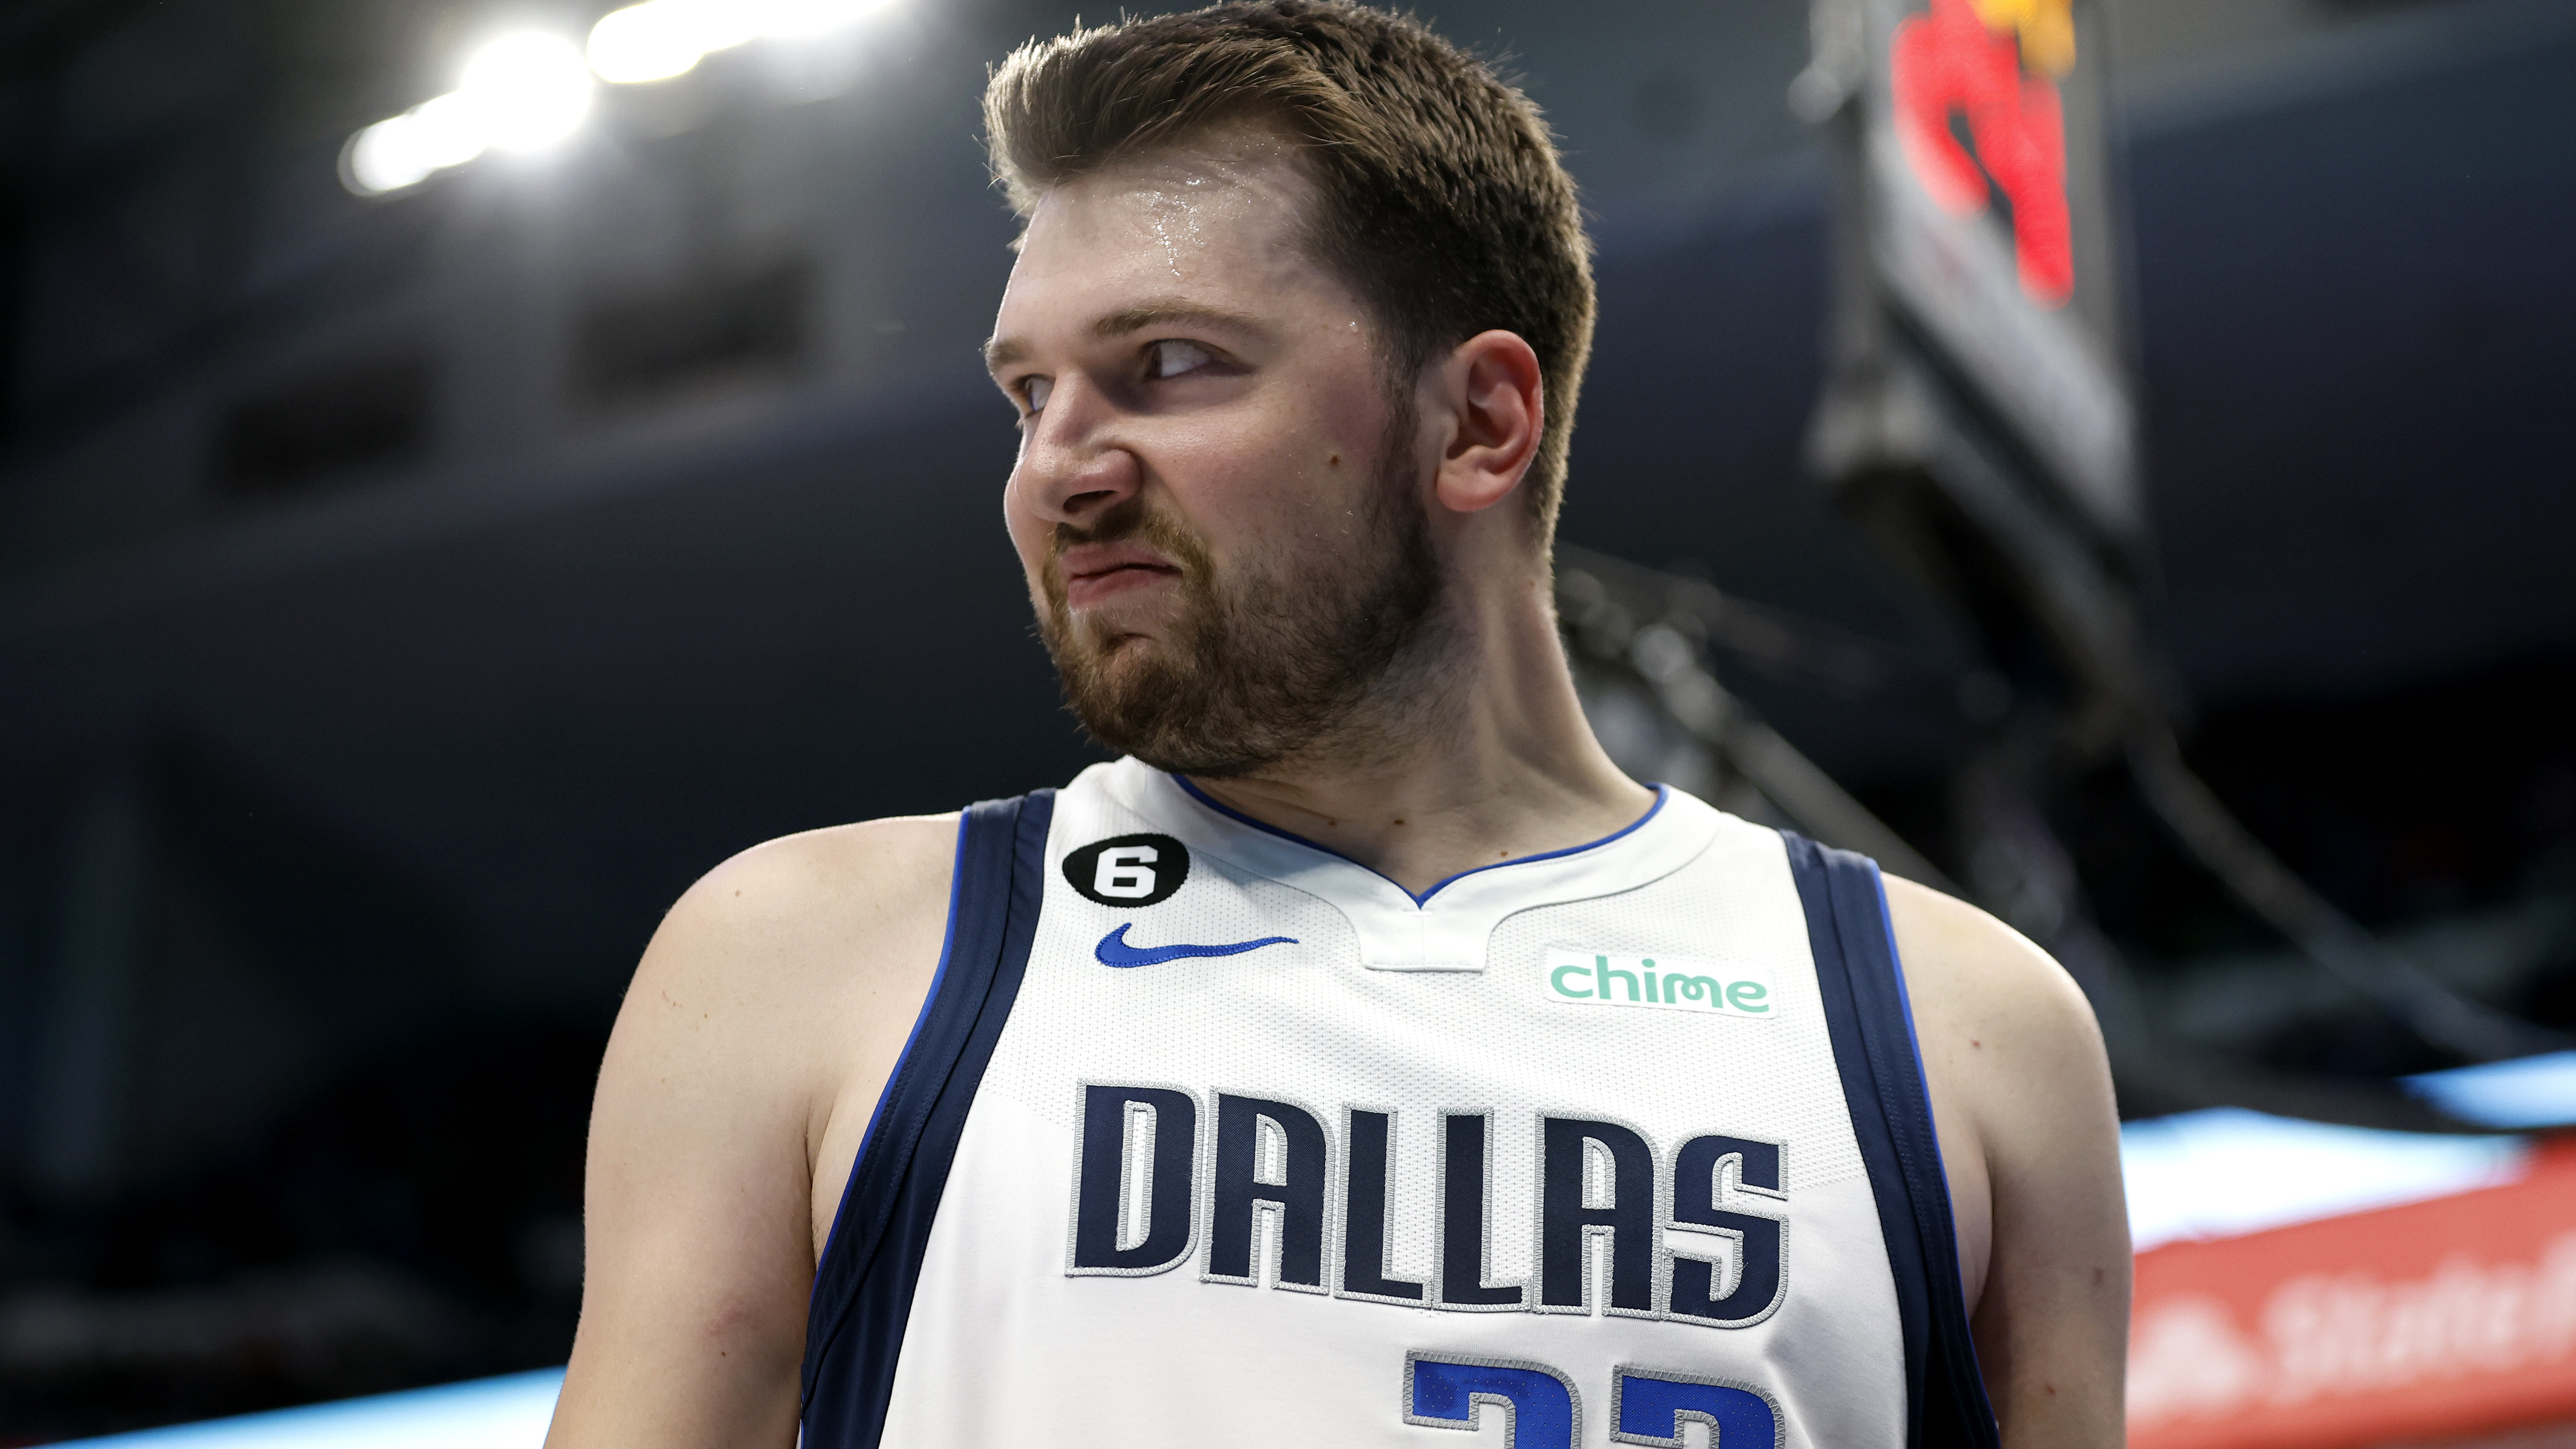 Luka Doncic after a foul and the bucket during the 2023 season